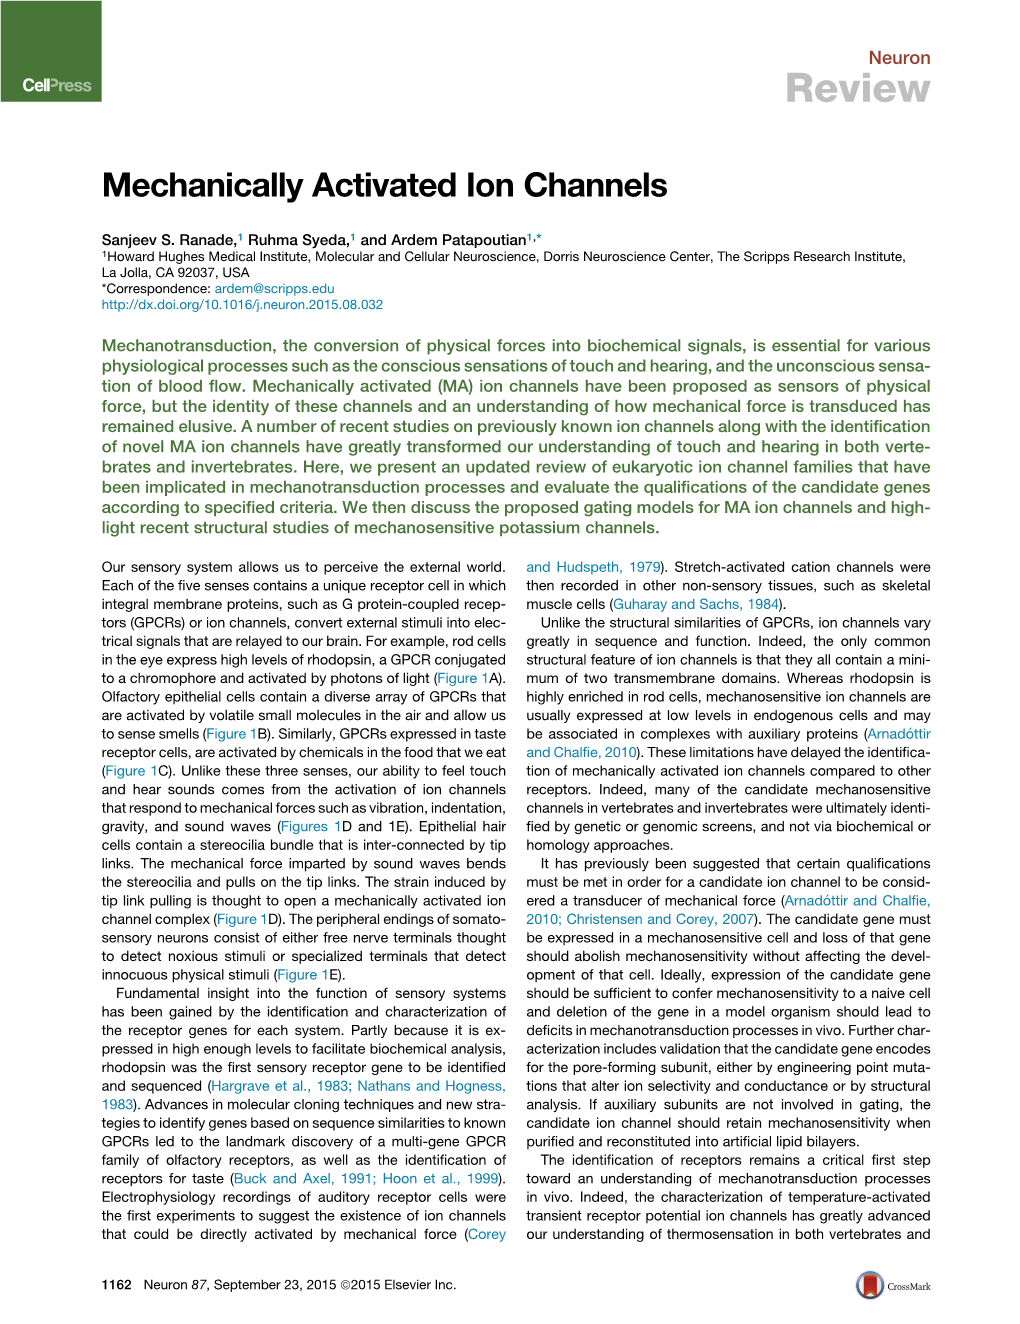 Mechanically Activated Ion Channels